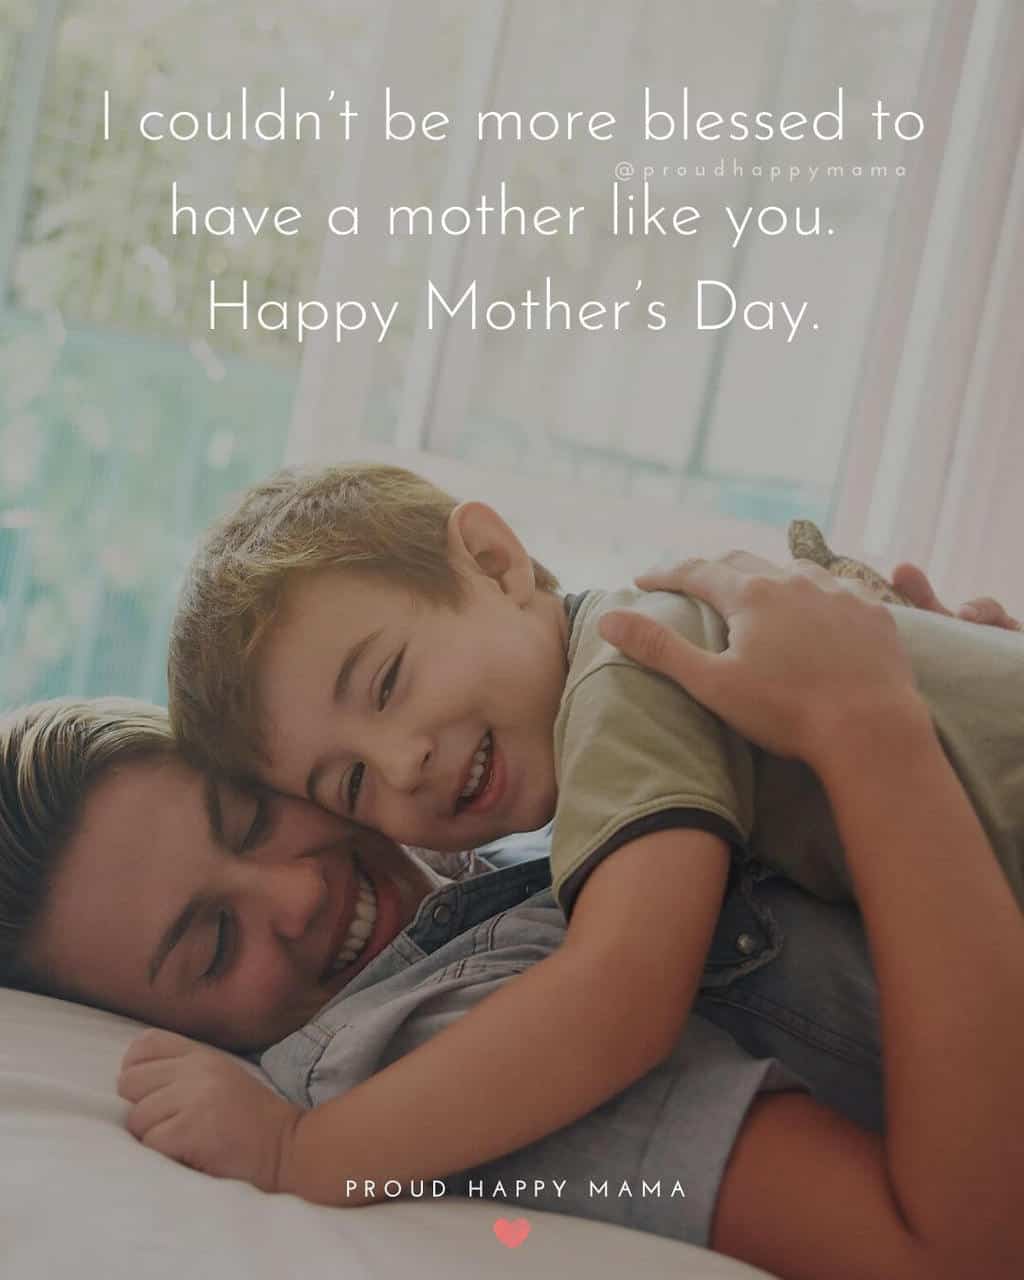 Mothers Day Quotes For Mom | I couldn’t be more blessed to have a mother like you. Happy Mother’s Day.